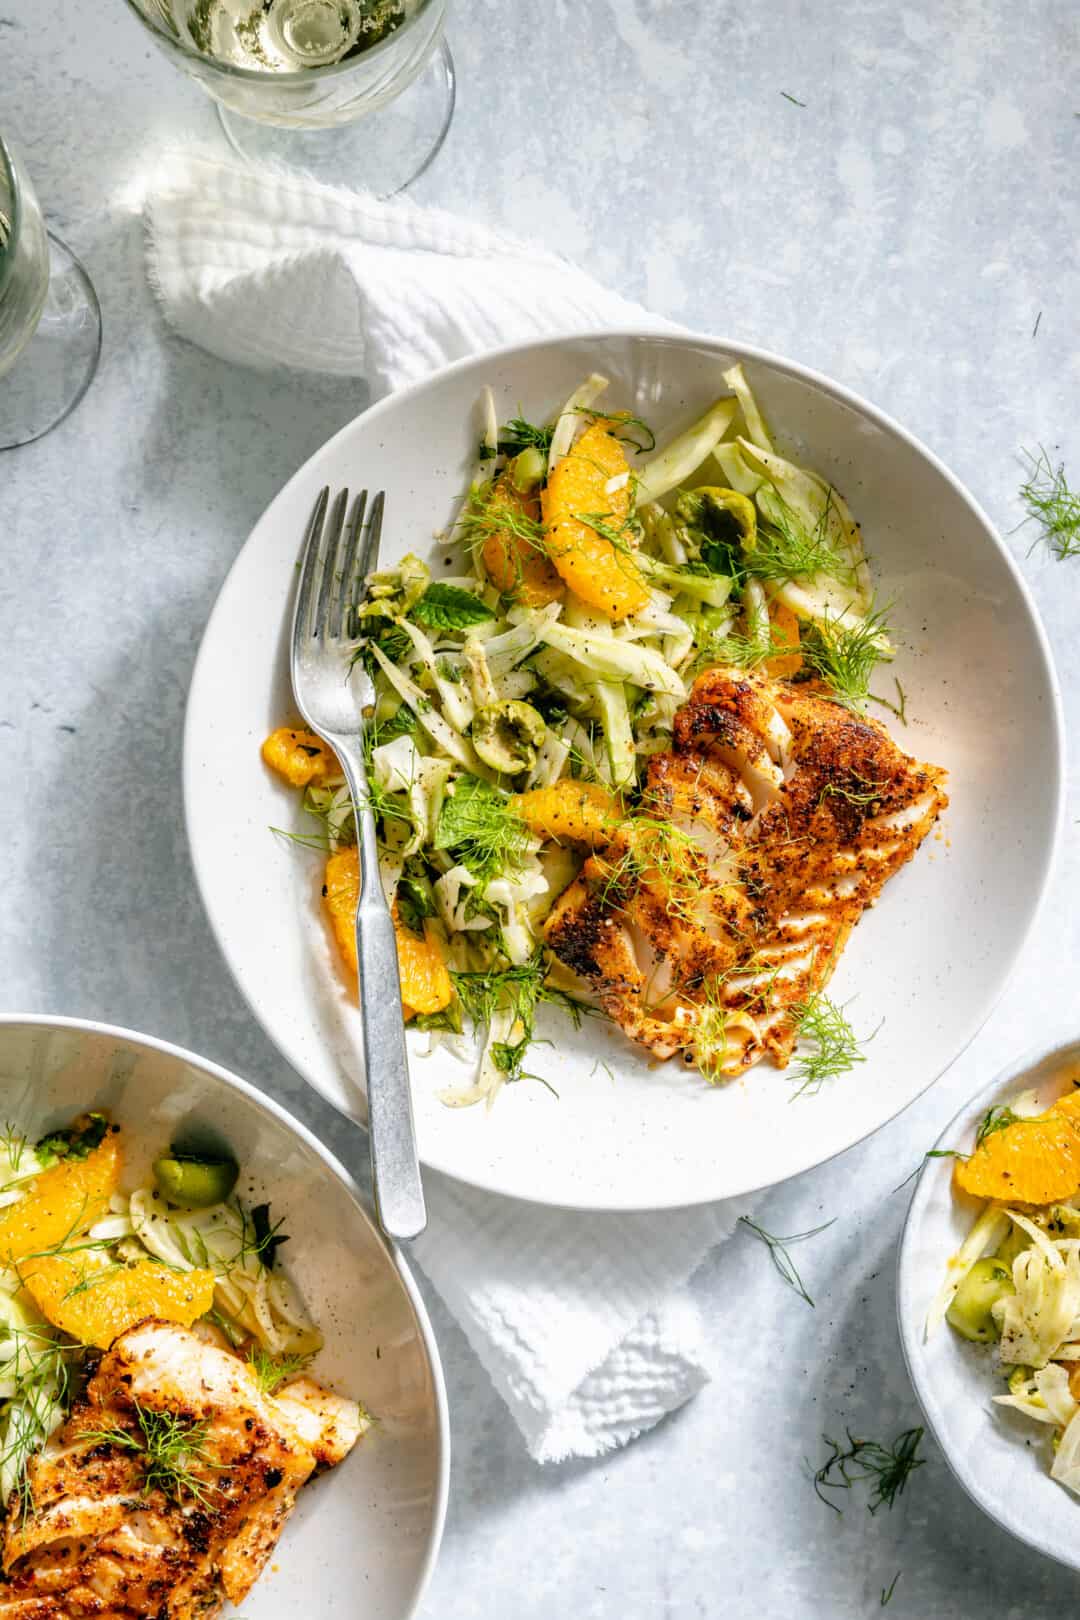 Spiced Fish with Fennel and Orange Slaw